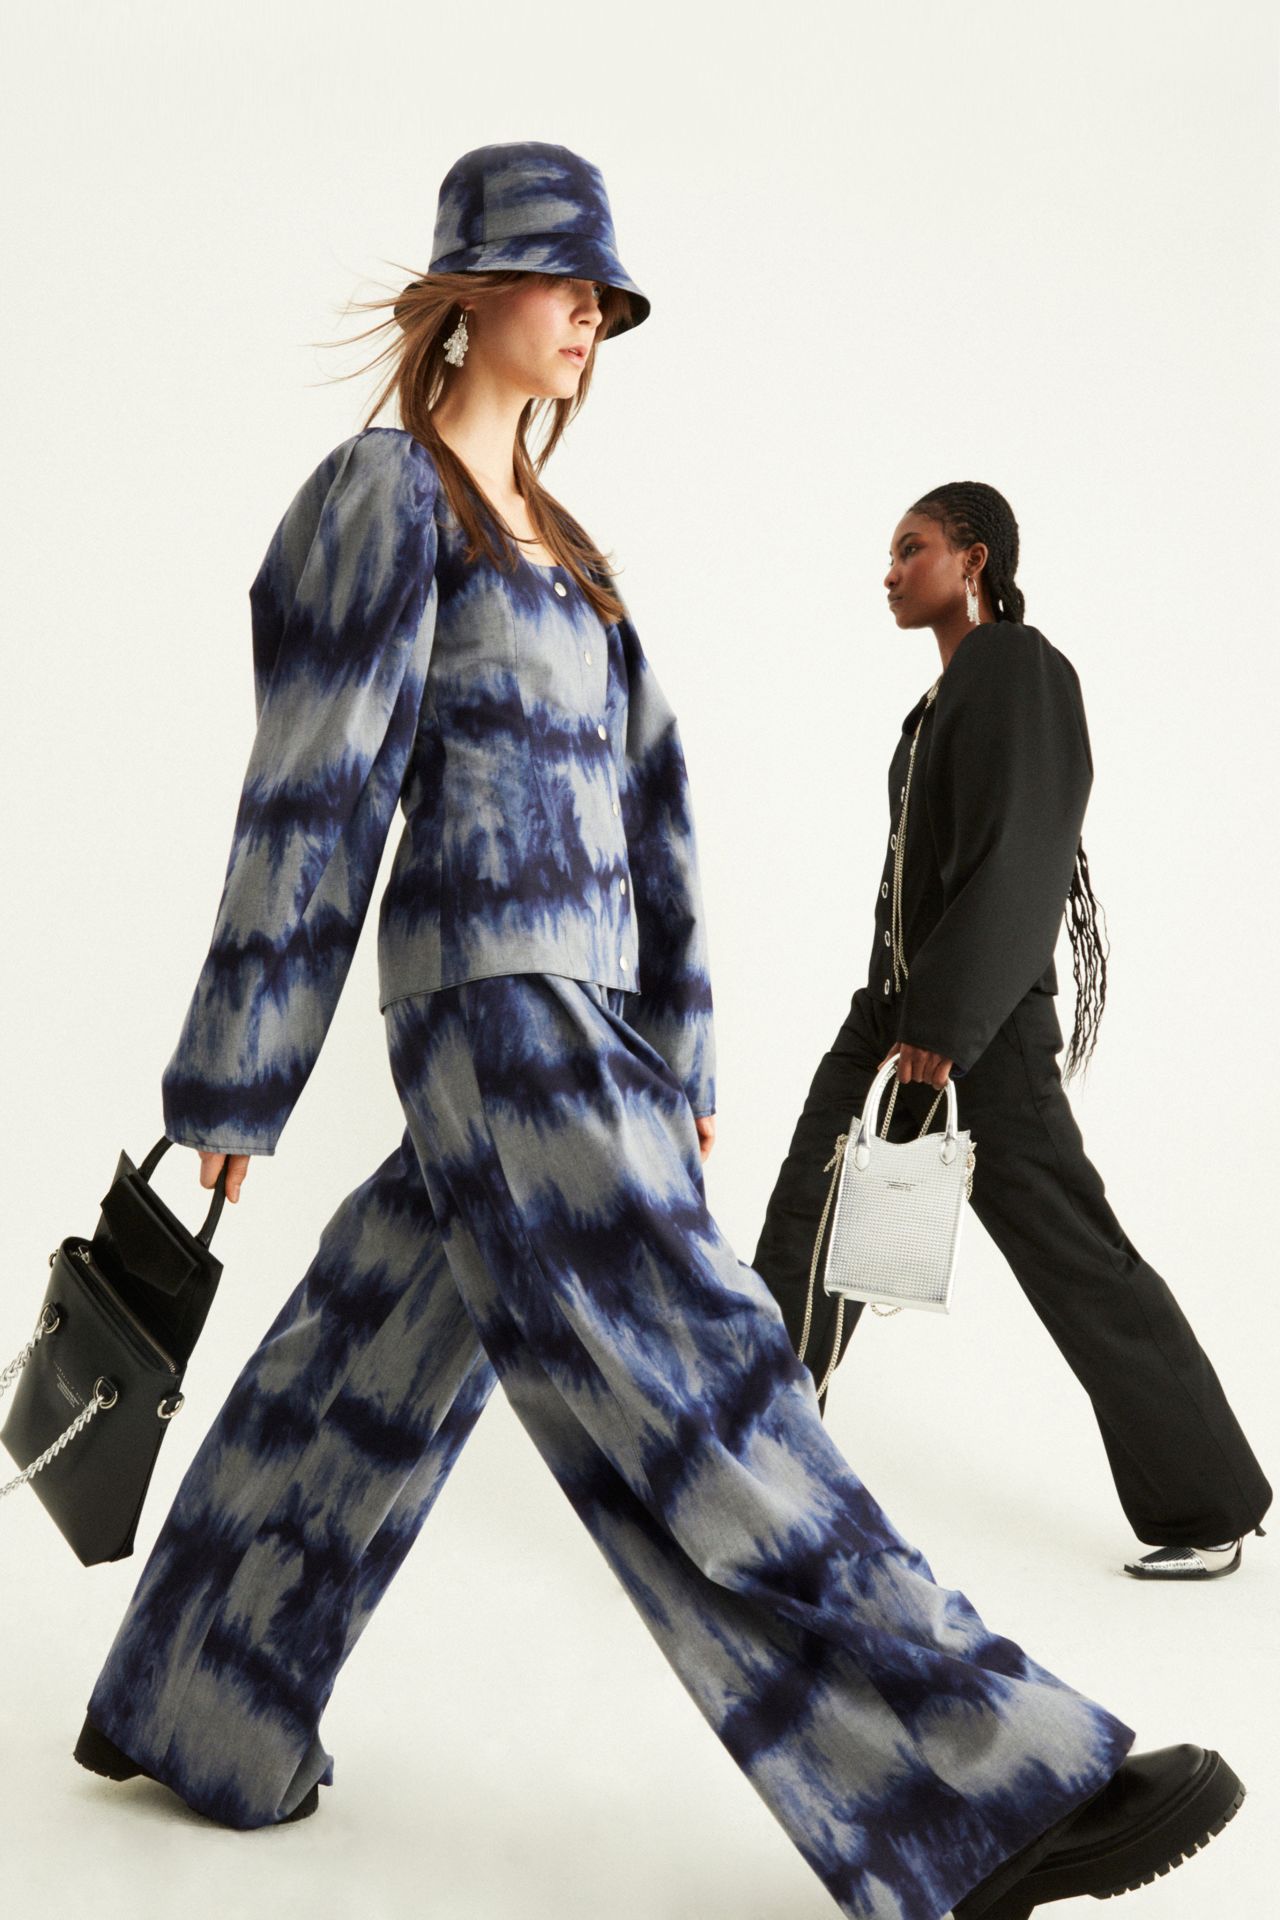 The Victoria/Tomas Fall-Winter 2021/22 collection kept sustainability in mind by producing an entirely reversible range.